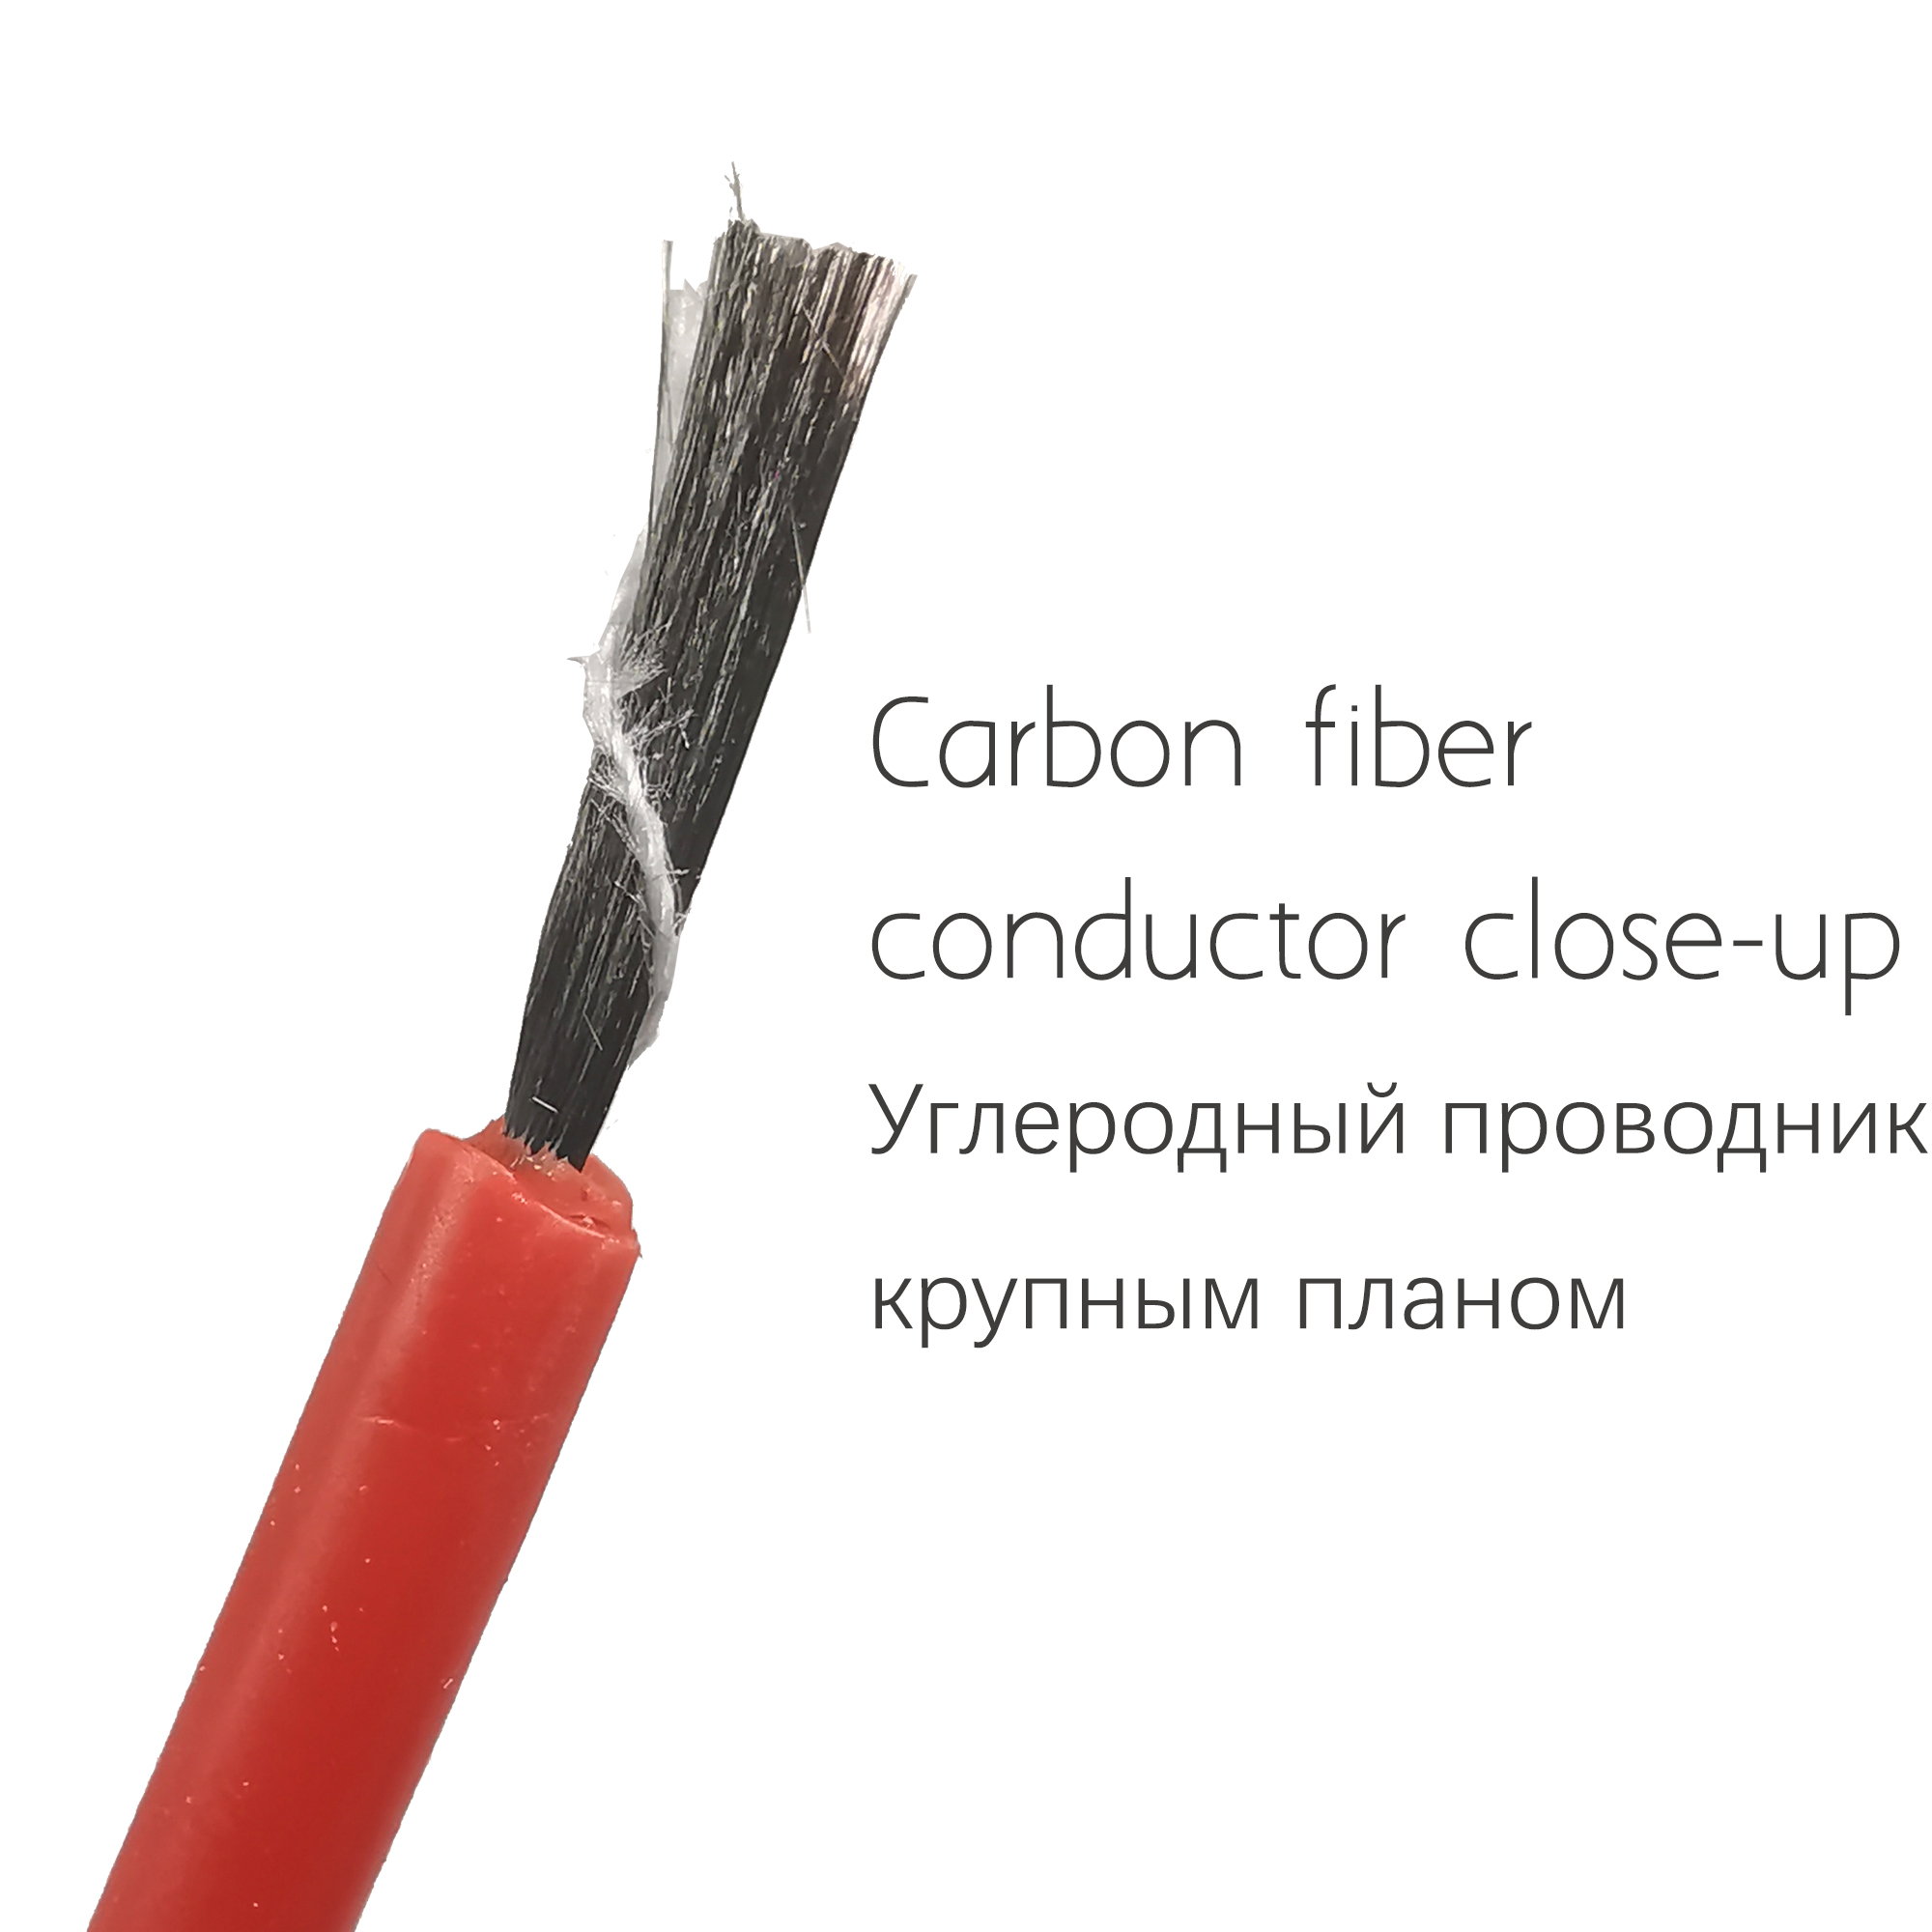 12K 18meter 81watt carbon fiber silicone rubber heating cable multipurpose soft tough heat wire radiation-free warm heat cable